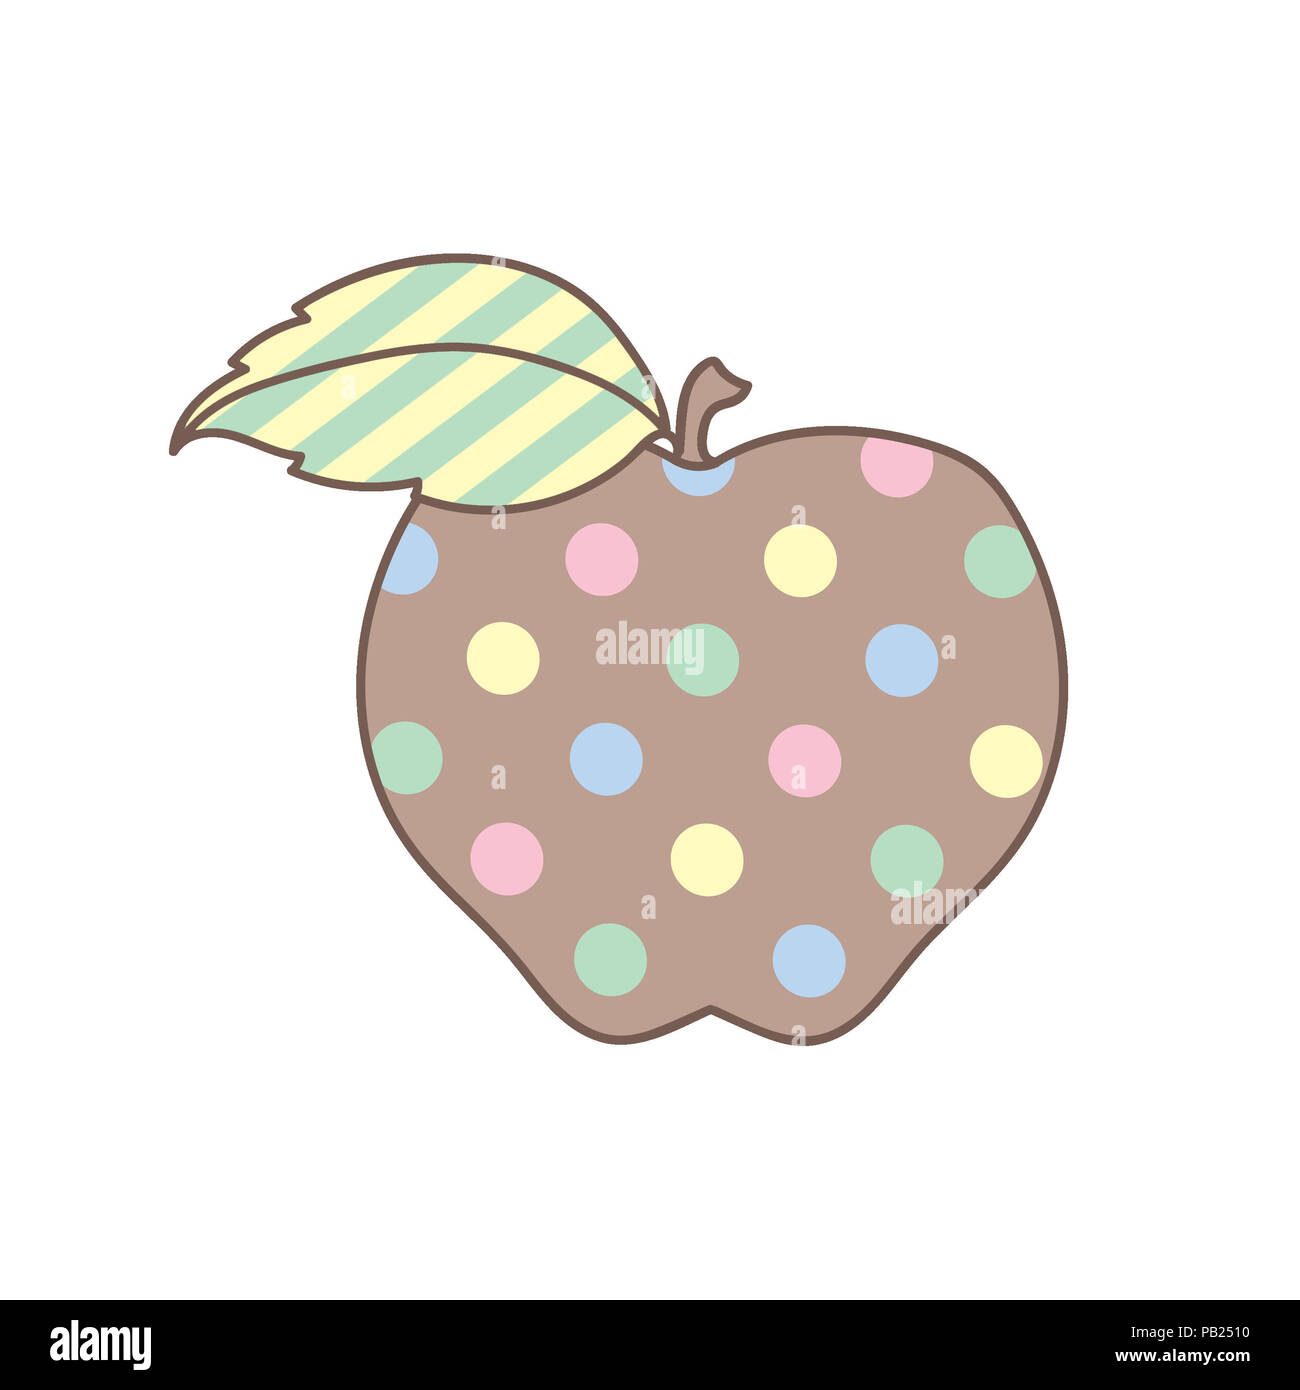 Illustration of an apple in pastel colors with polka dots and stripes on white background. Stock Photo